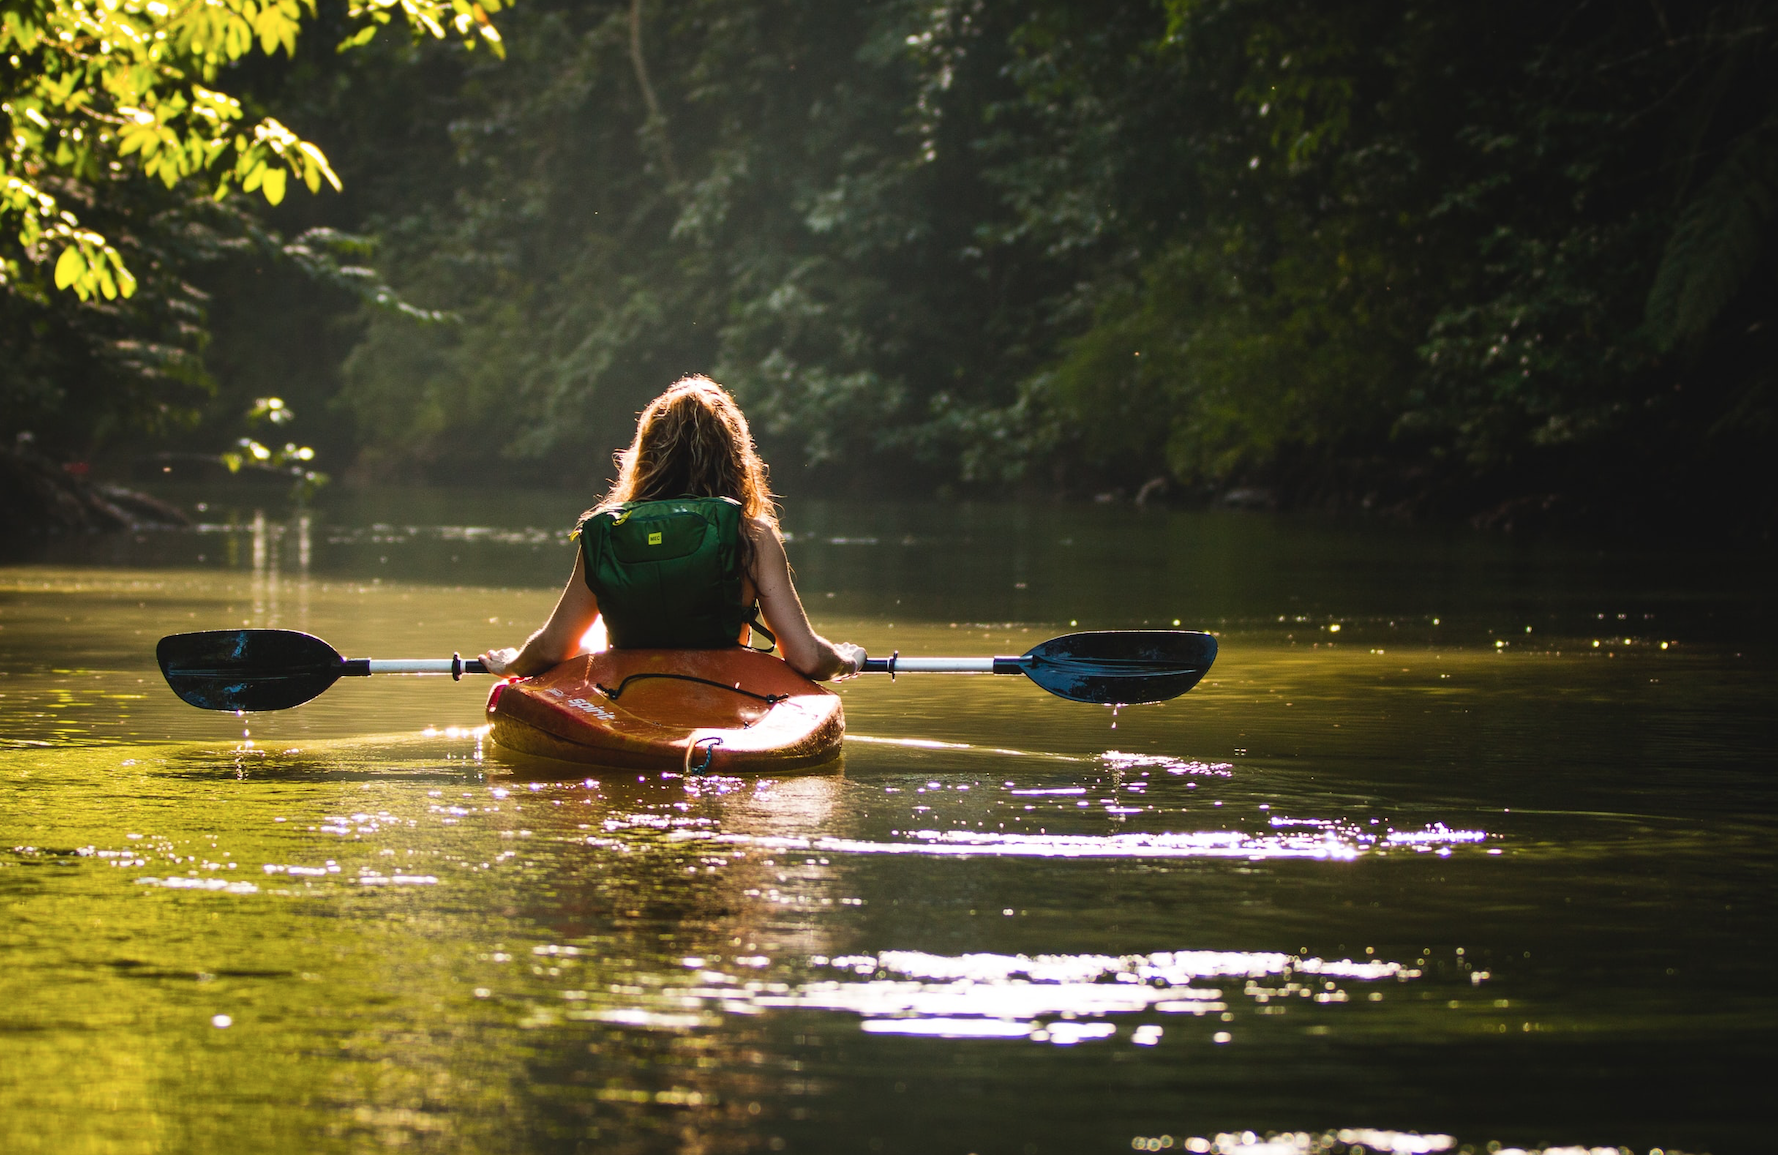 Learn More About Kayaking